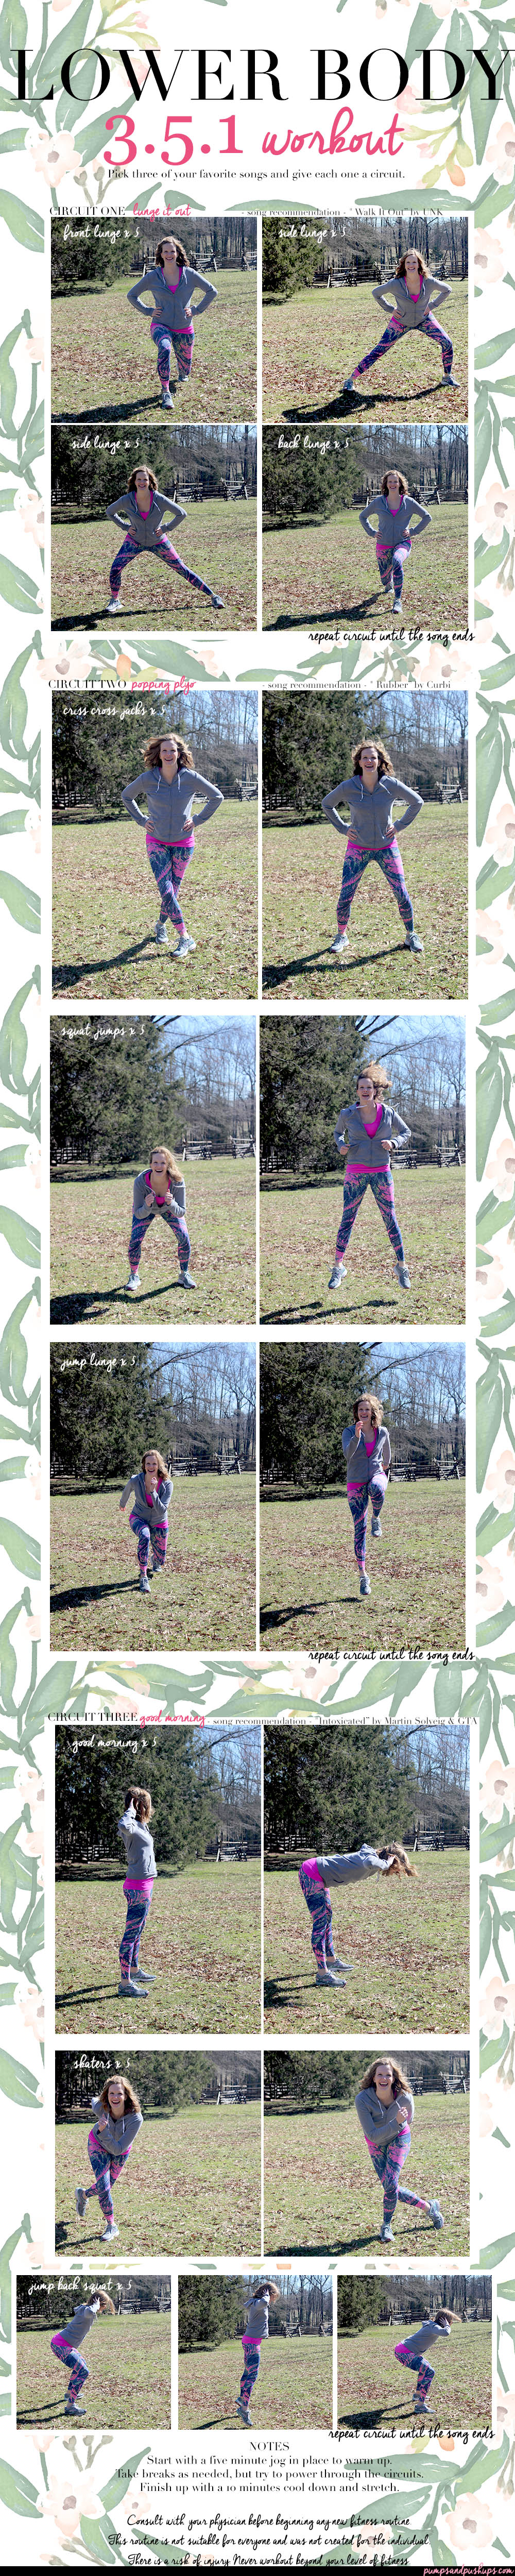 Lower Body Workout 3.5.1. / Dona Jo Fitwear / Pumps and Push-Ups